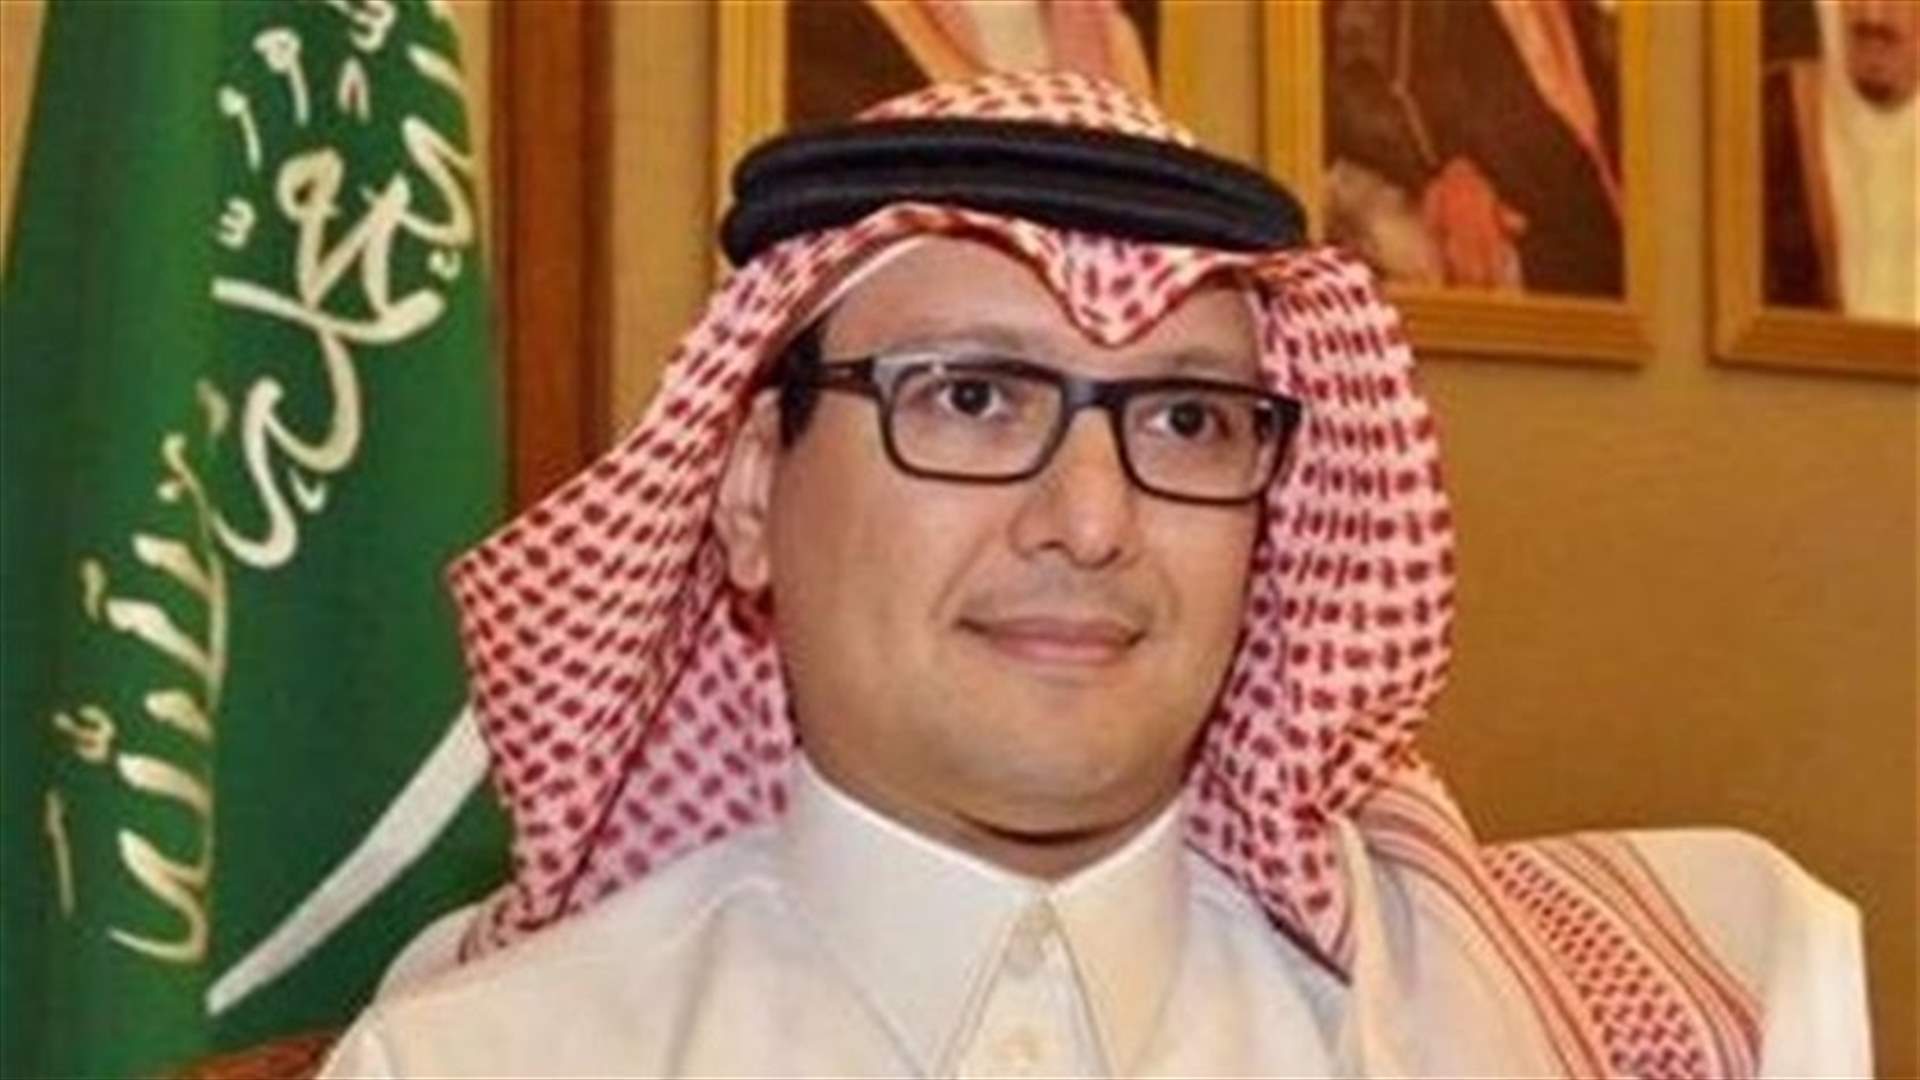 Saudi ambassador denies to LBCI statements about Neom project  published in al-Joumhouria daily